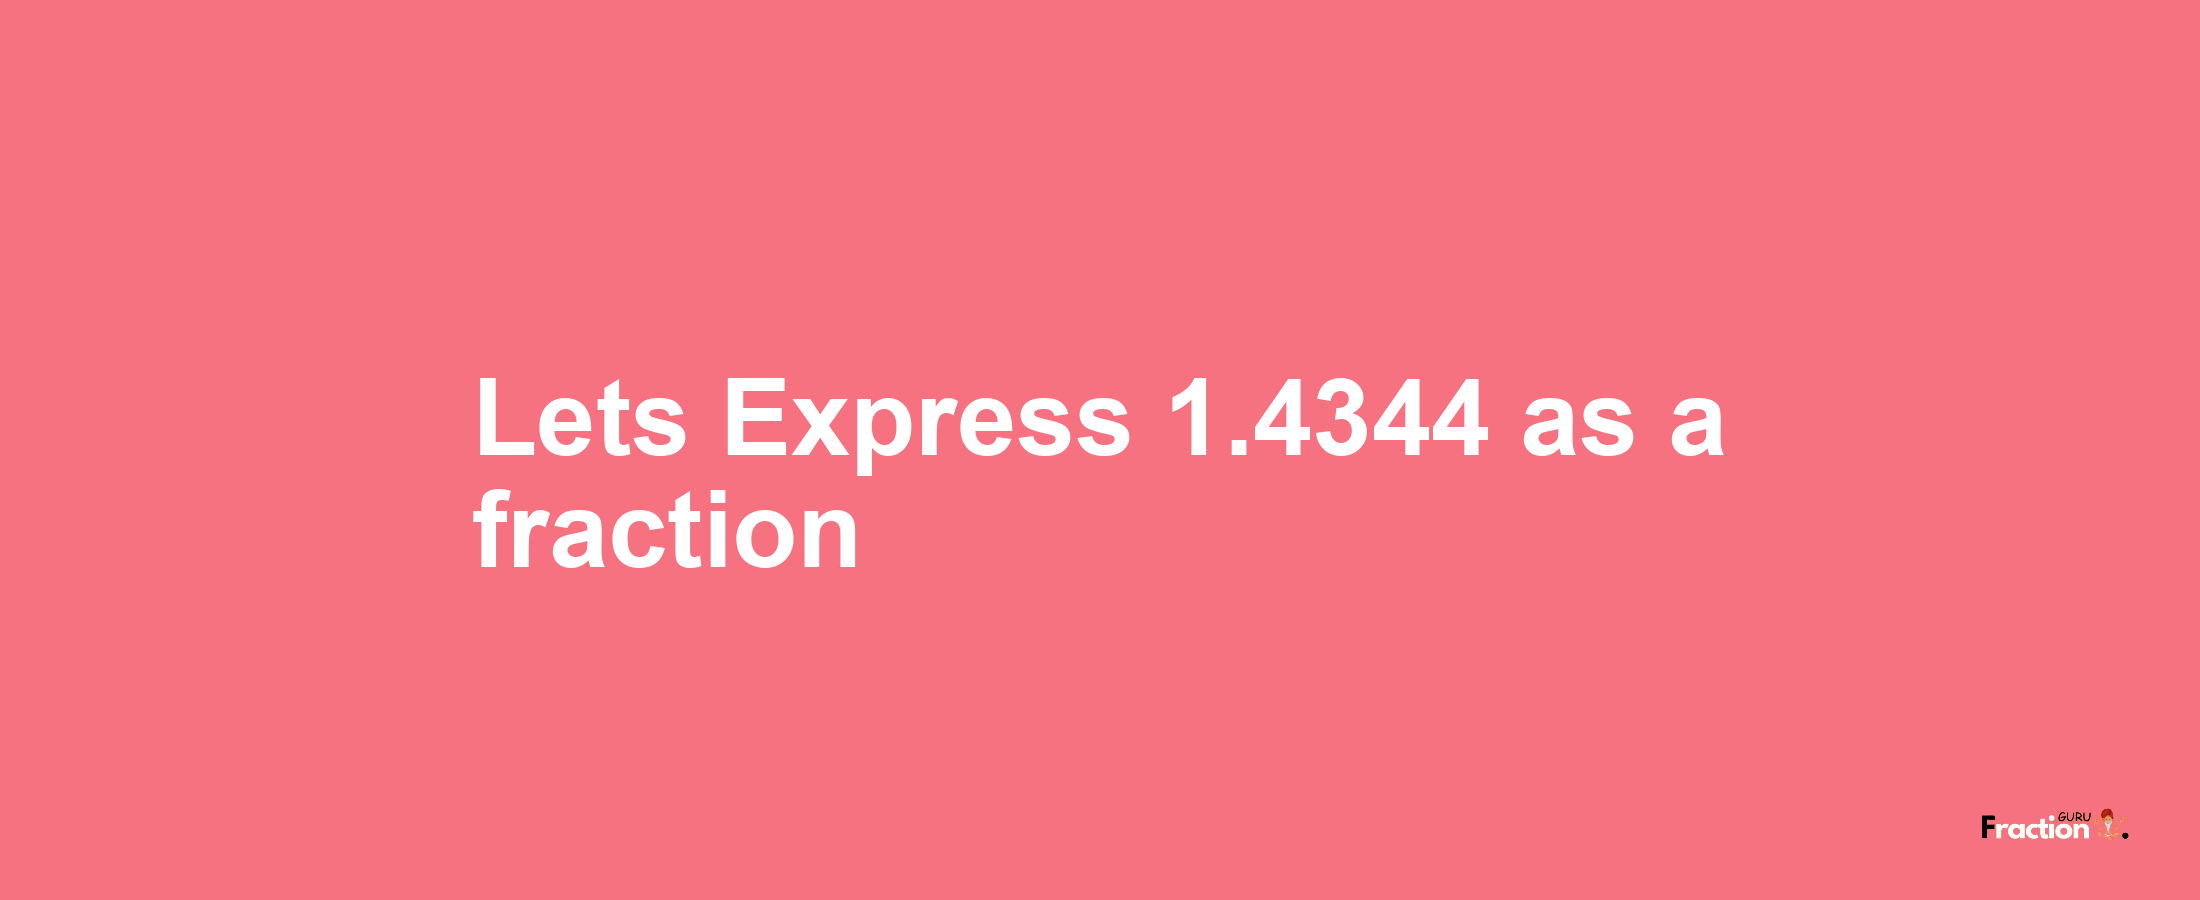 Lets Express 1.4344 as afraction